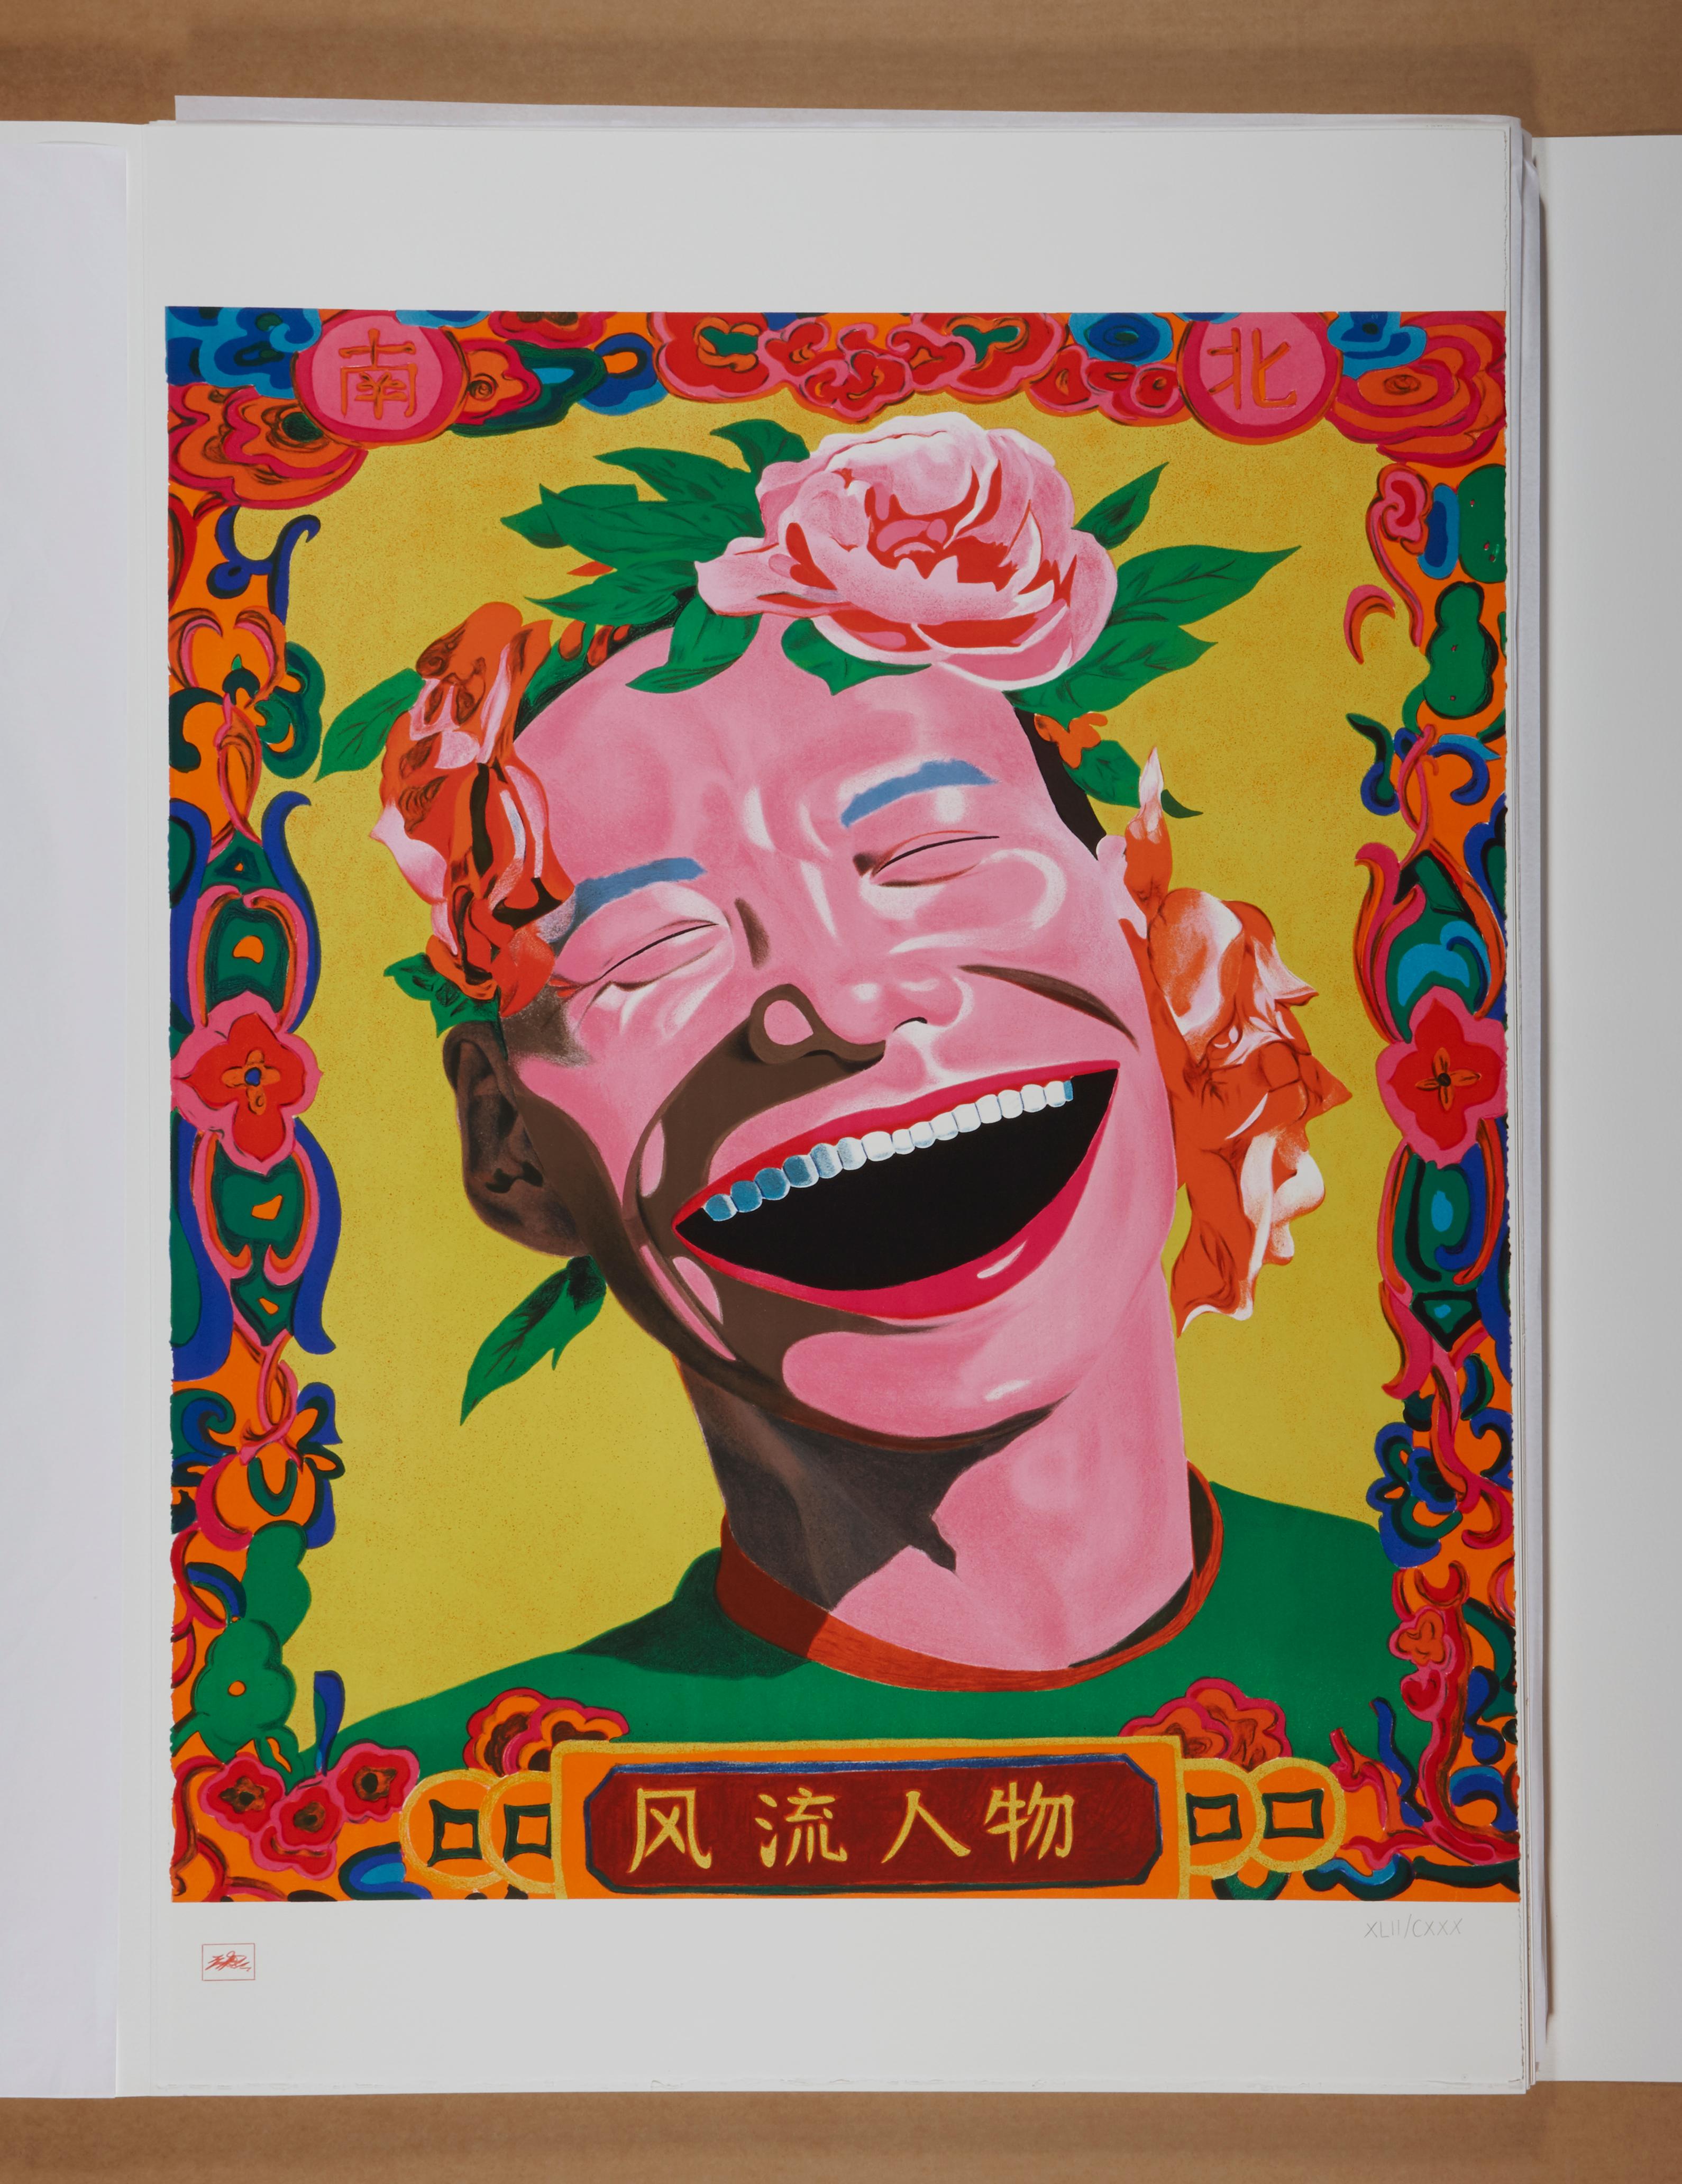 Yue Minjun, Remarkable People
Contemporary, 21st Century, Lithograph, Limited Edition, Chinese
Lithograph
Edition of 130
80 × 120 cm (47 1/5 × 31 1/2 in)
Signed and numbered, accompanied by Certificate of Authenticity
In mint condition, as acquired